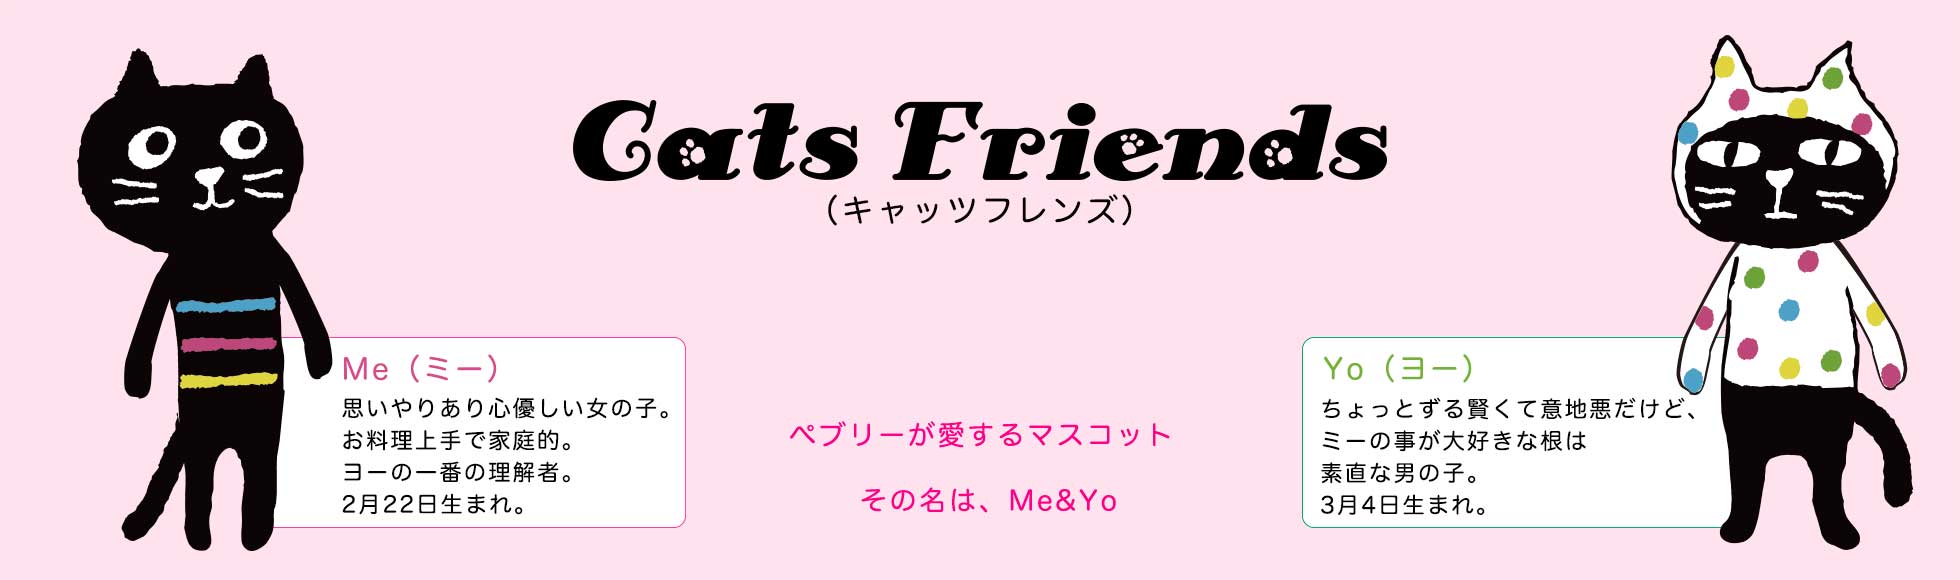 CatsFriends | Pebbly公式通販サイト